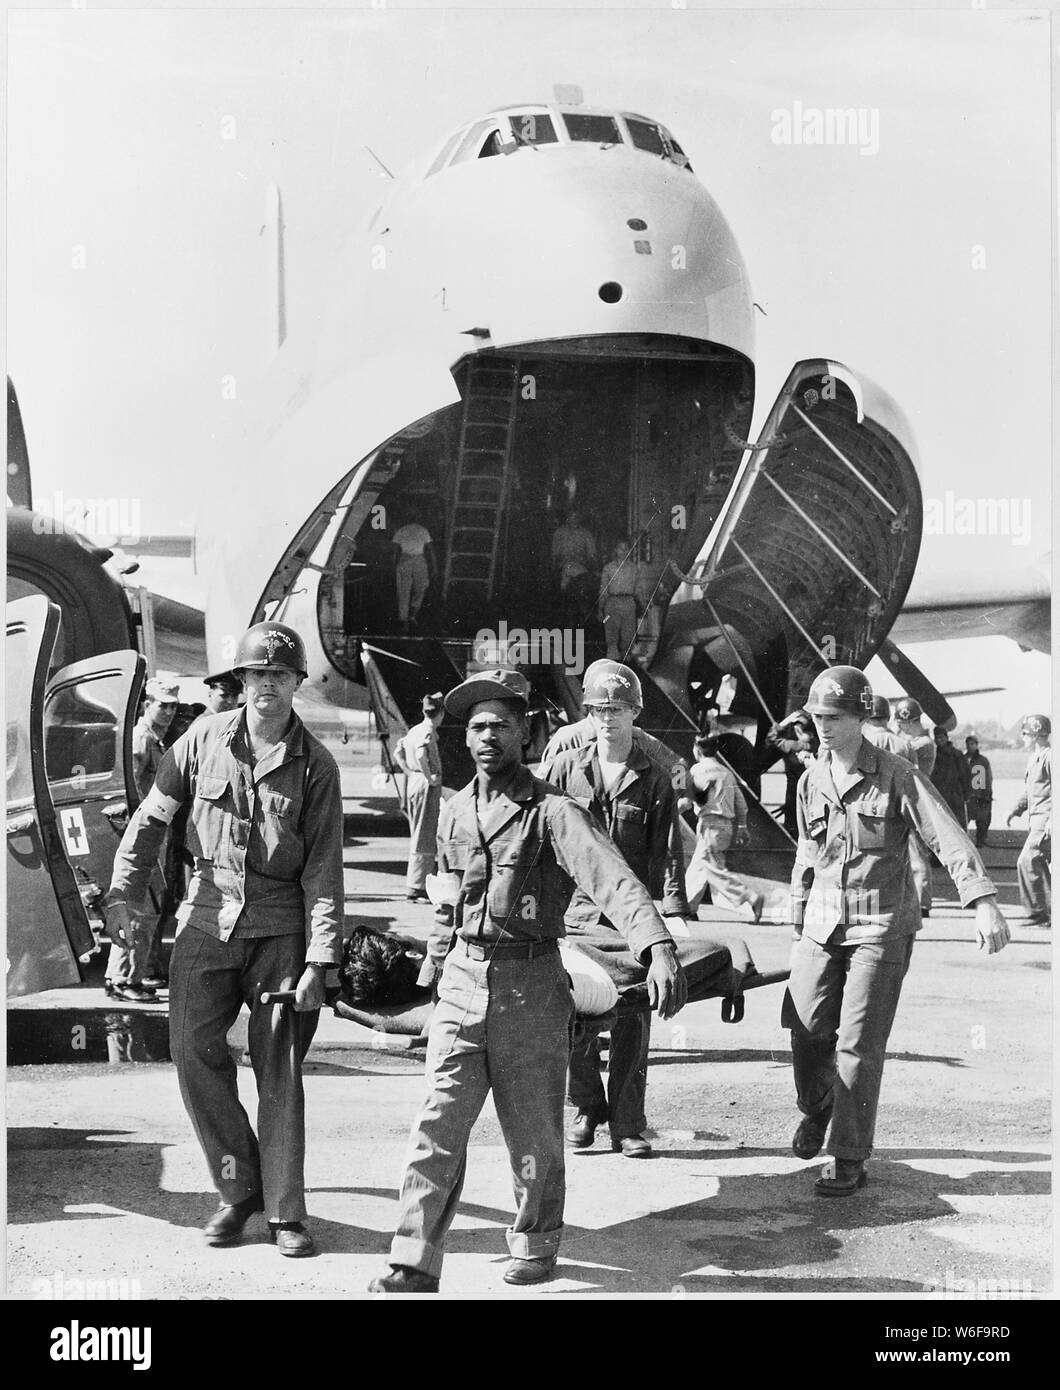 Army medics carry wounded UN personnel to waiting ambulances, after the patients' arrival at this Tokyo base in the U.S. Air Force C-124 in the background. The C-124, the largest cargo plane operating on the Korean airlift, carries as many as 135 patients. Forty of the patients on this flight, critically wounded, were flown to Camp Drew Hospital near Tokyo in C-47's of the Royal Thailand Air Force. The trip, which took only 20 minutes, would have required six hours by road. Stock Photo